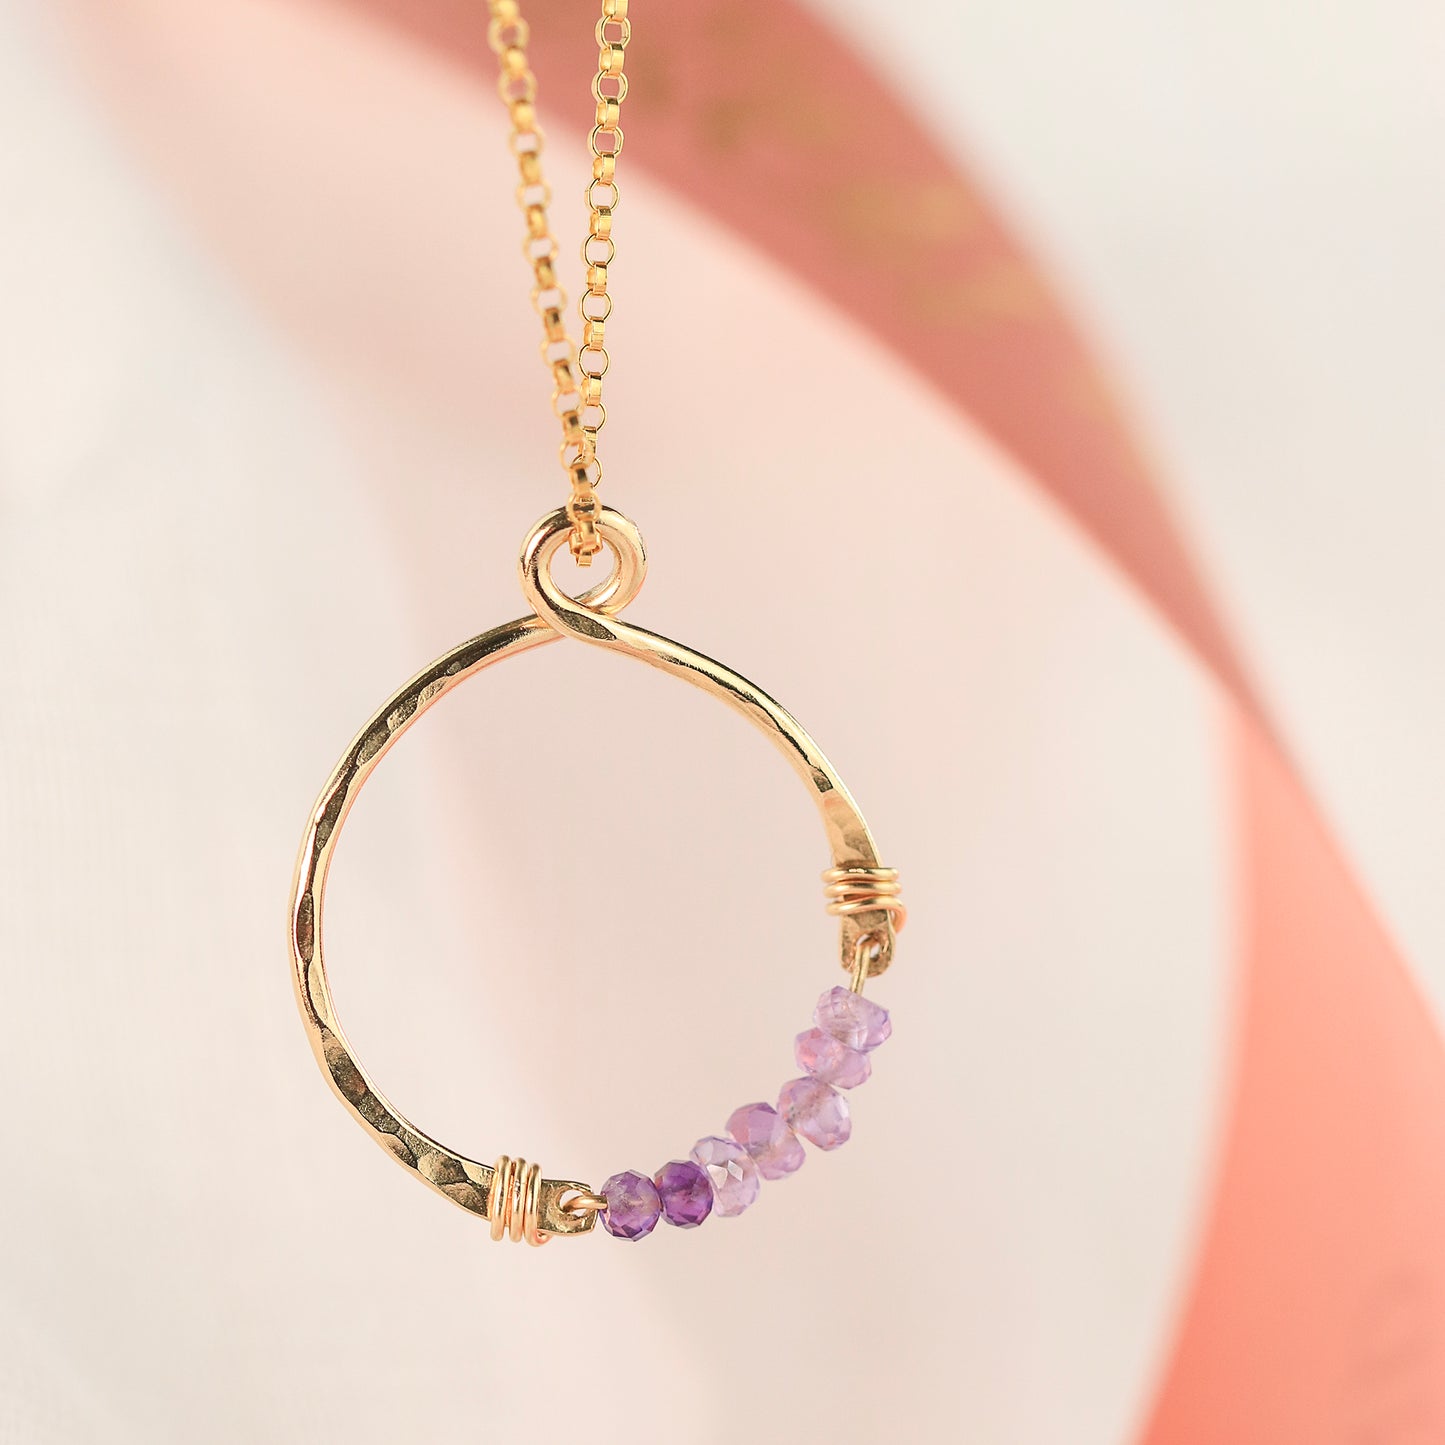 Gift for Goddaughter - Infinity Necklace with Birthstone - Silver & Gold